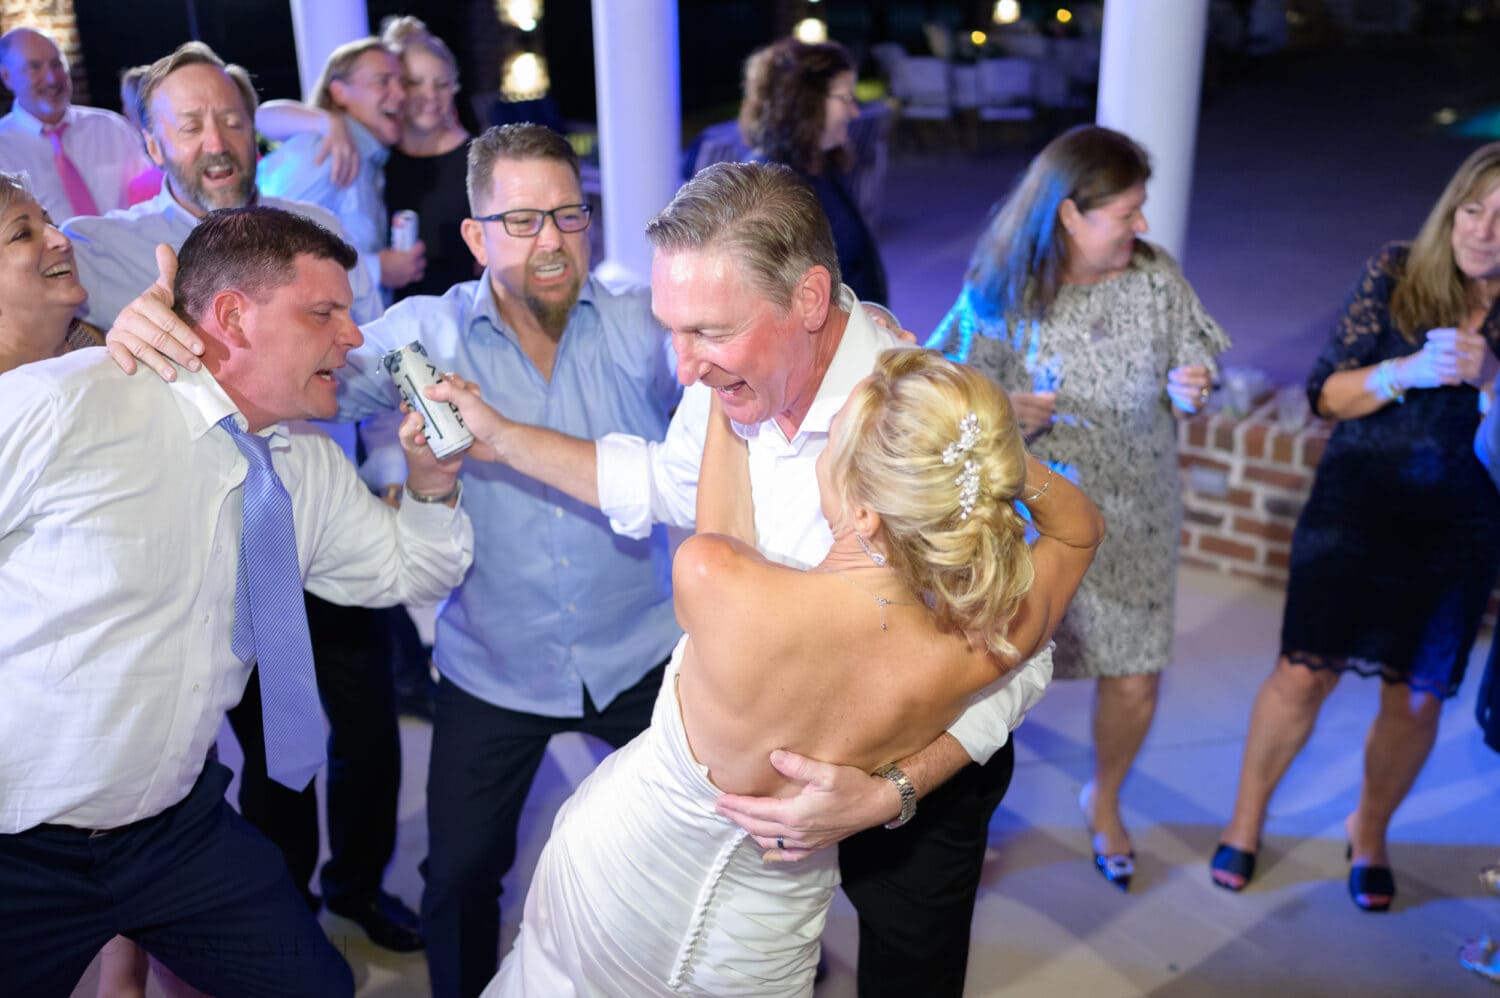 Fun dancing during the reception - Safe Harbor Reserve Harbor Yacht Club